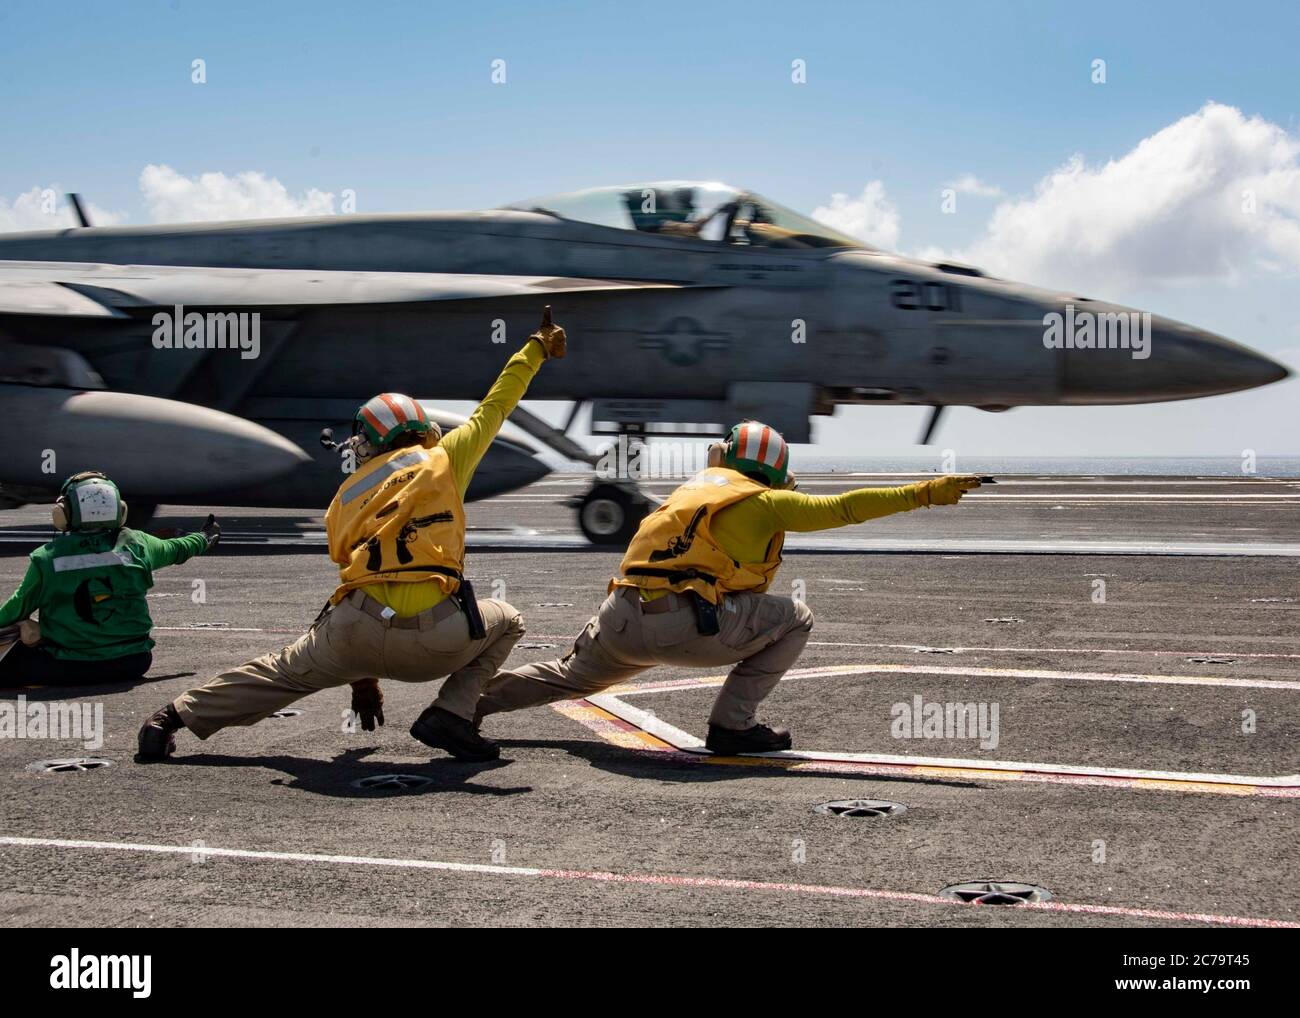 U.S. Navy deck crew signals a F/A-18E Super Hornet fighter aircraft, attached to Royal Maces of Strike Fighter Squadron 27, for launch on the flight deck of the Nimitz-class aircraft carrier USS Ronald Reagan July 14, 2020 underway in the . Stock Photo